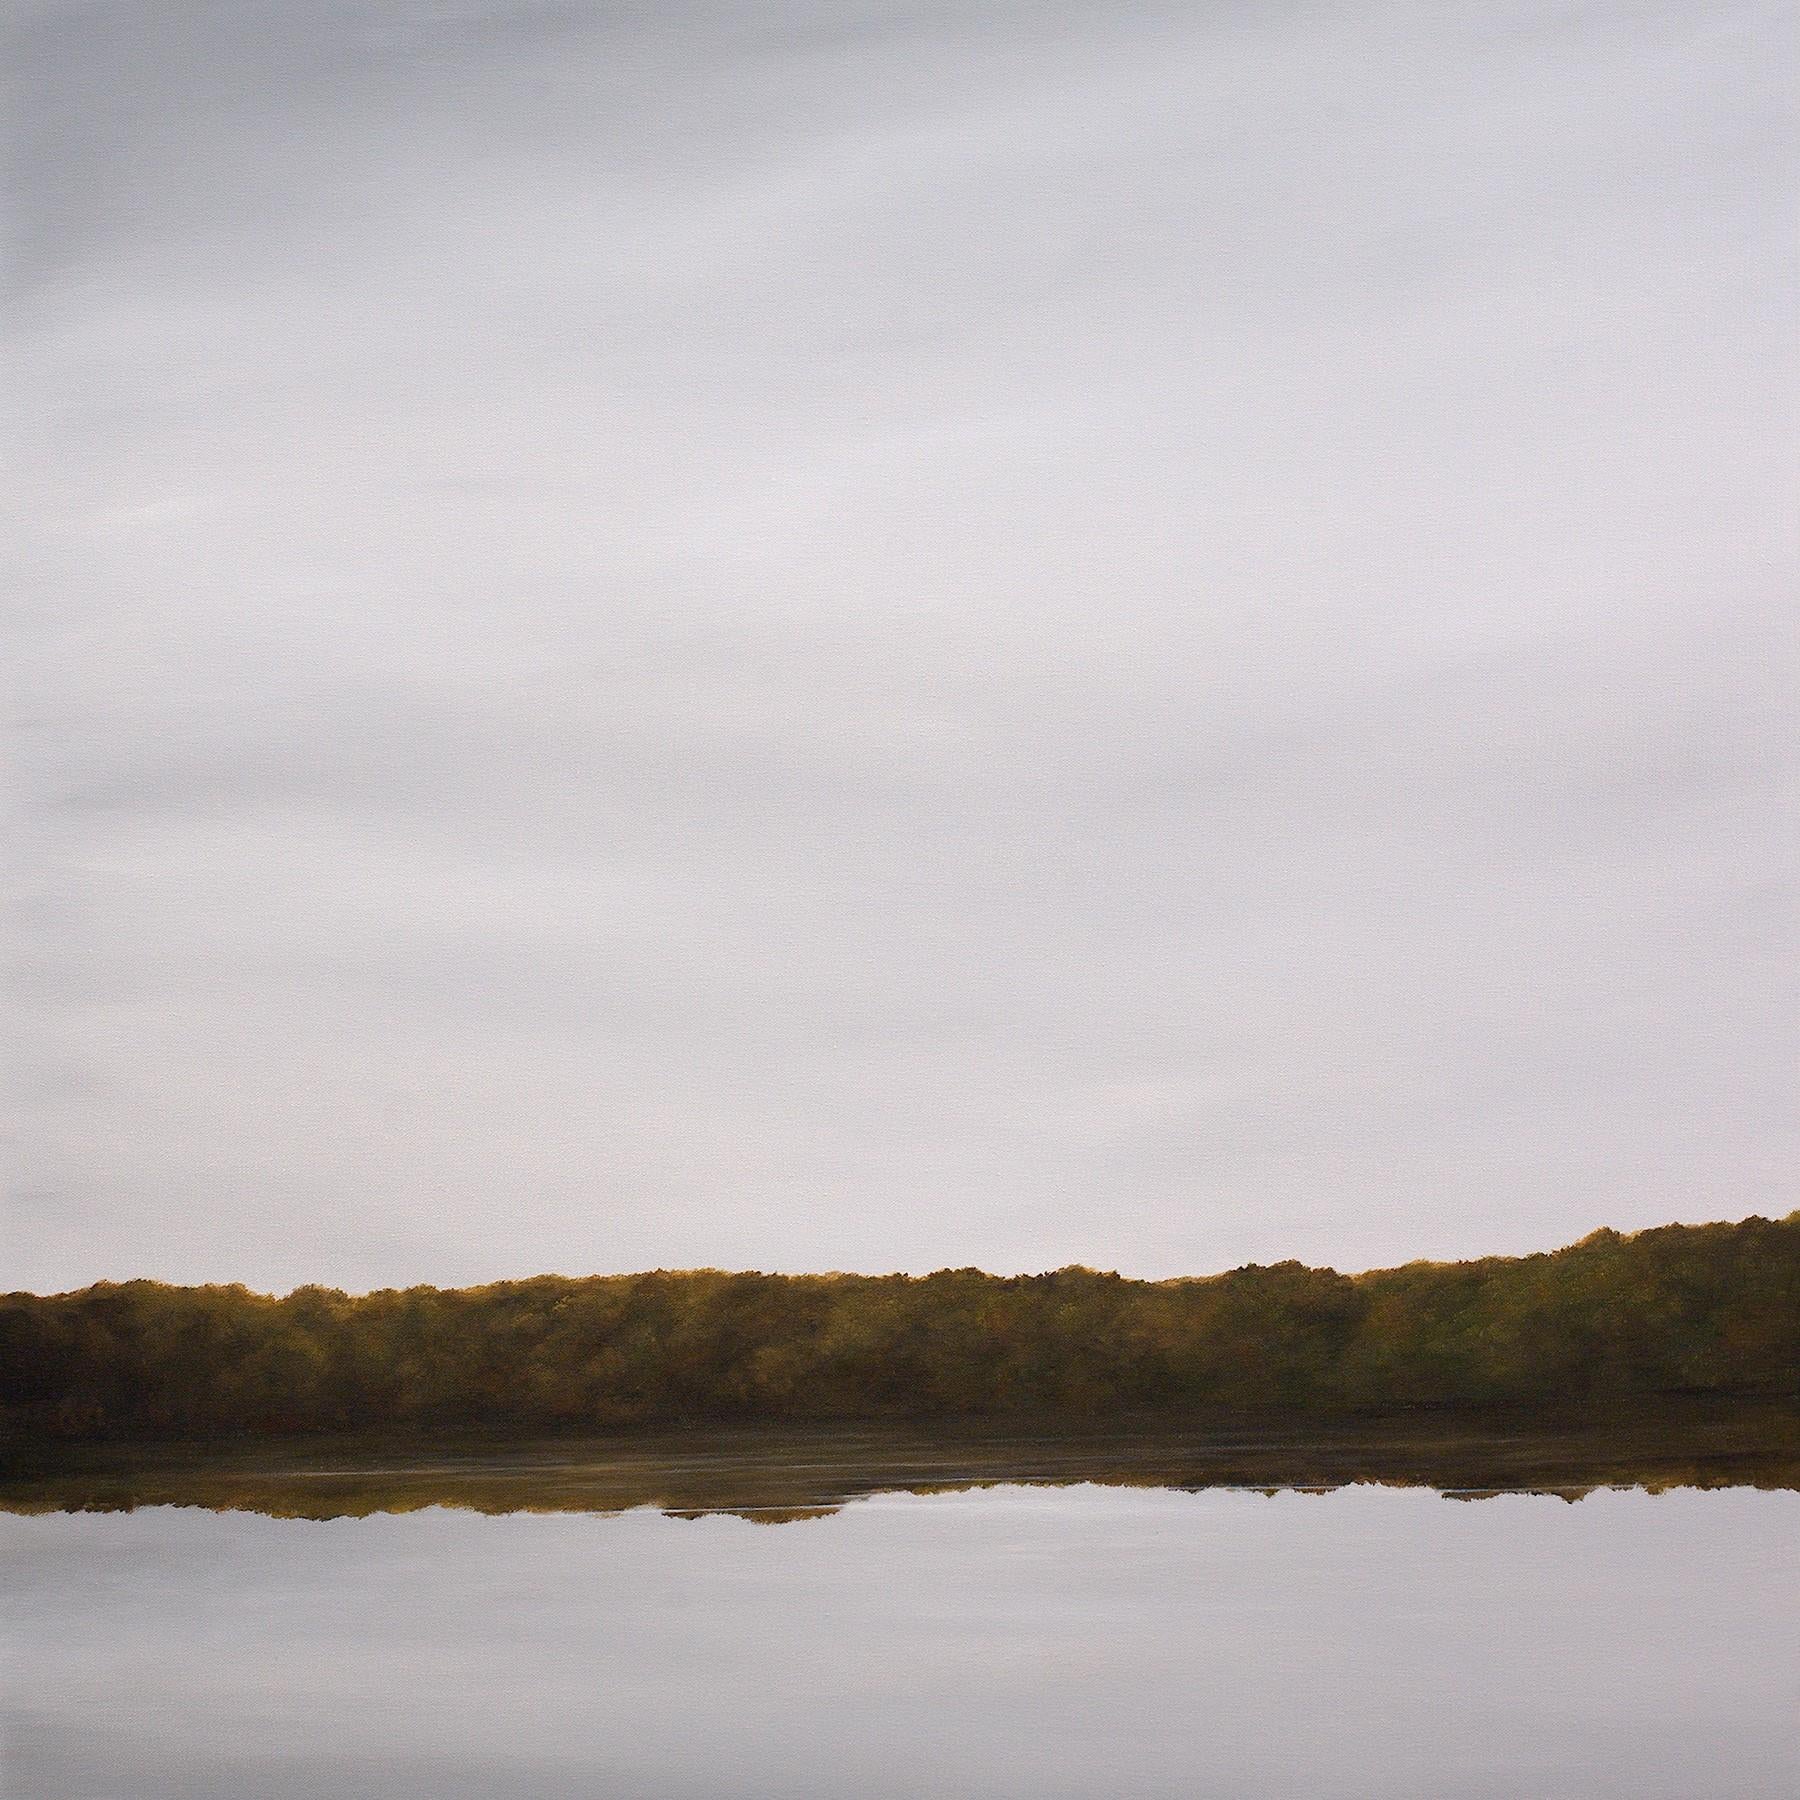 Ahzad Bogosian Landscape Painting – River Reflections #2 - Minimalist Oil Painting of Gray Sky Reflected in Water